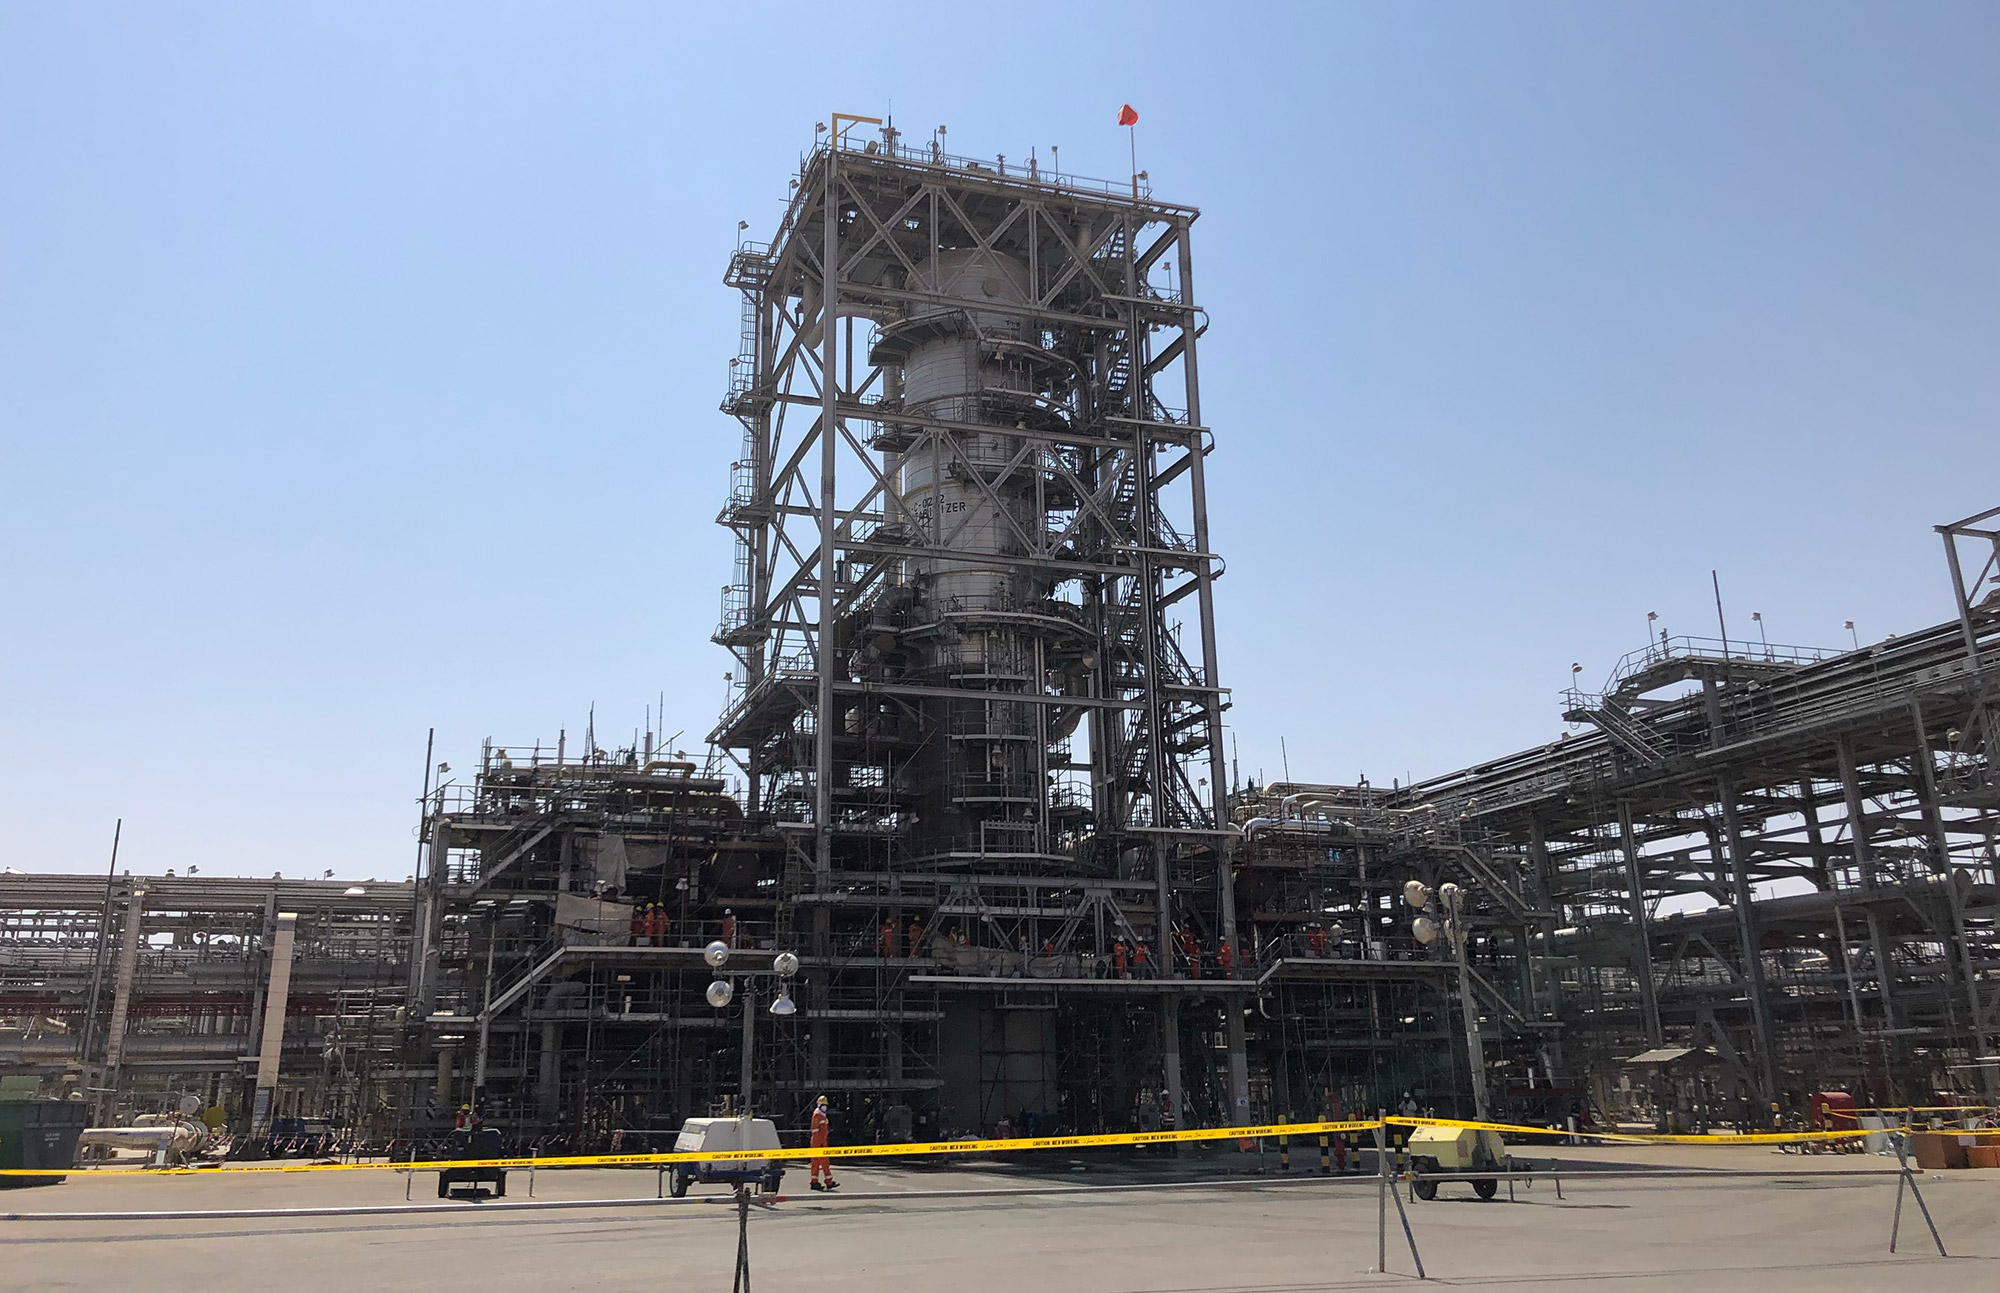 A restored tower at the Khurais oil field, Saudi Arabia, on Oct. 12, 2019.